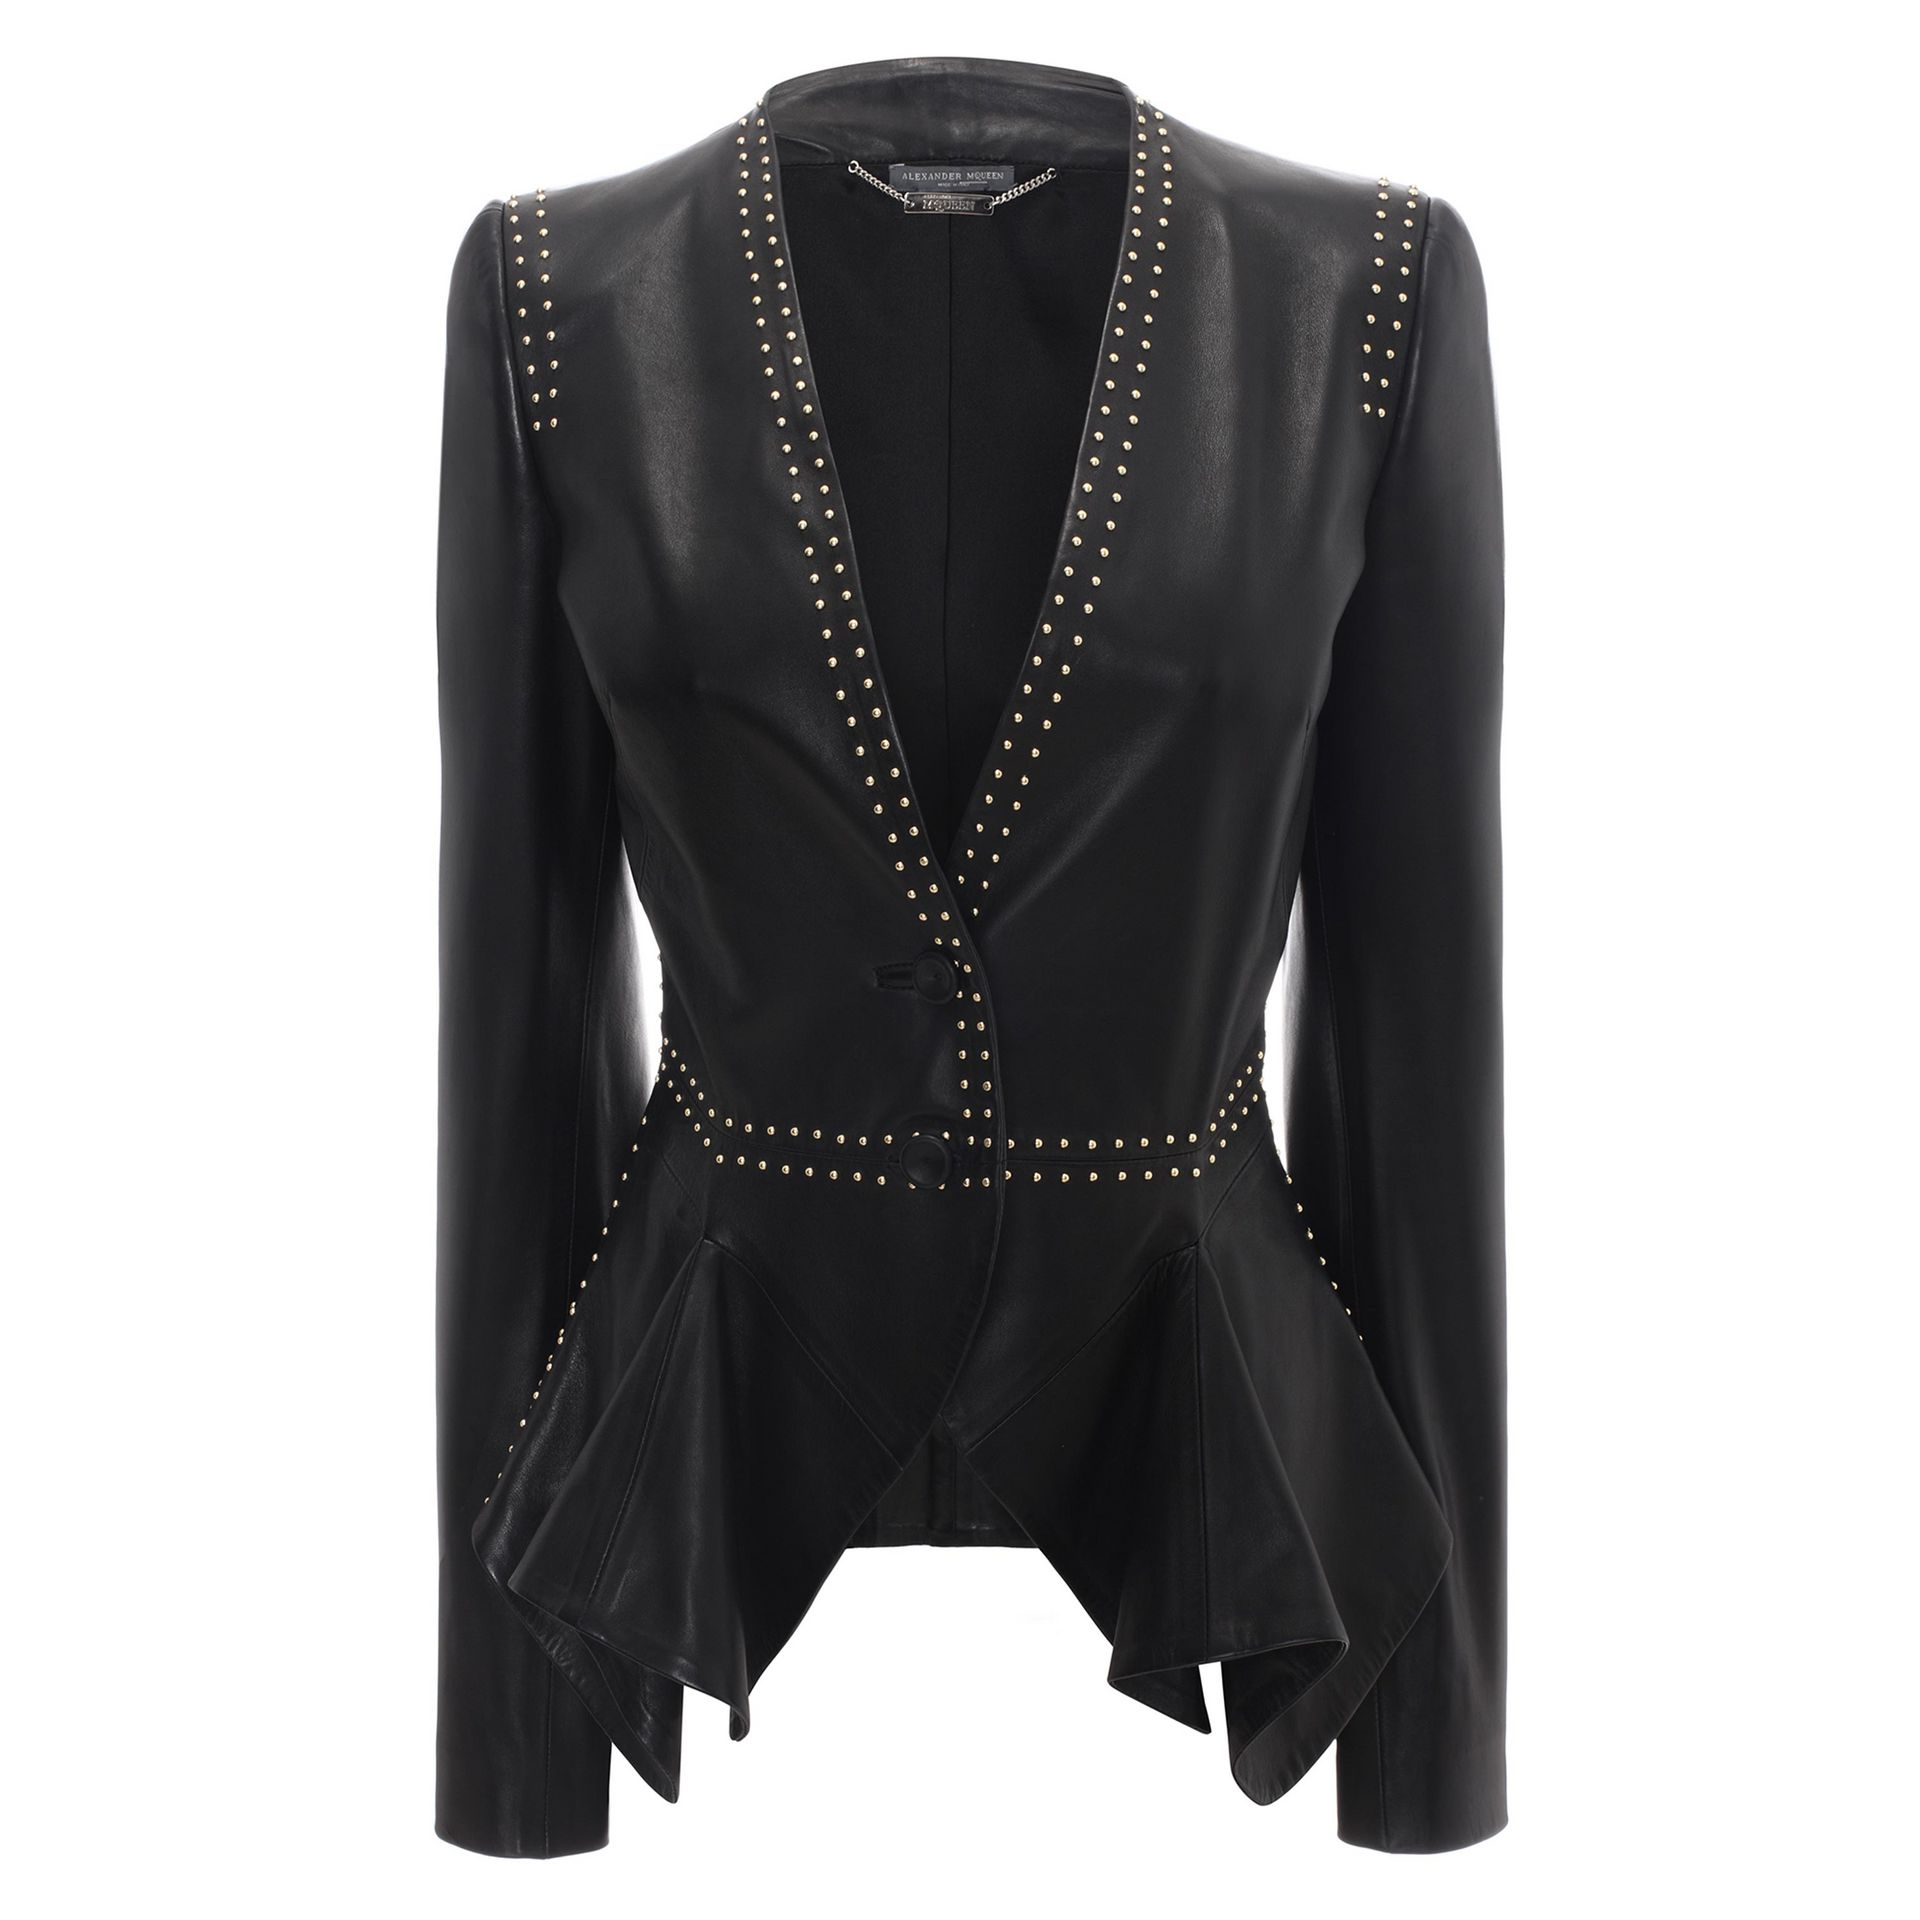 Alexander mcqueen Studded Leather Jacket in Black | Lyst